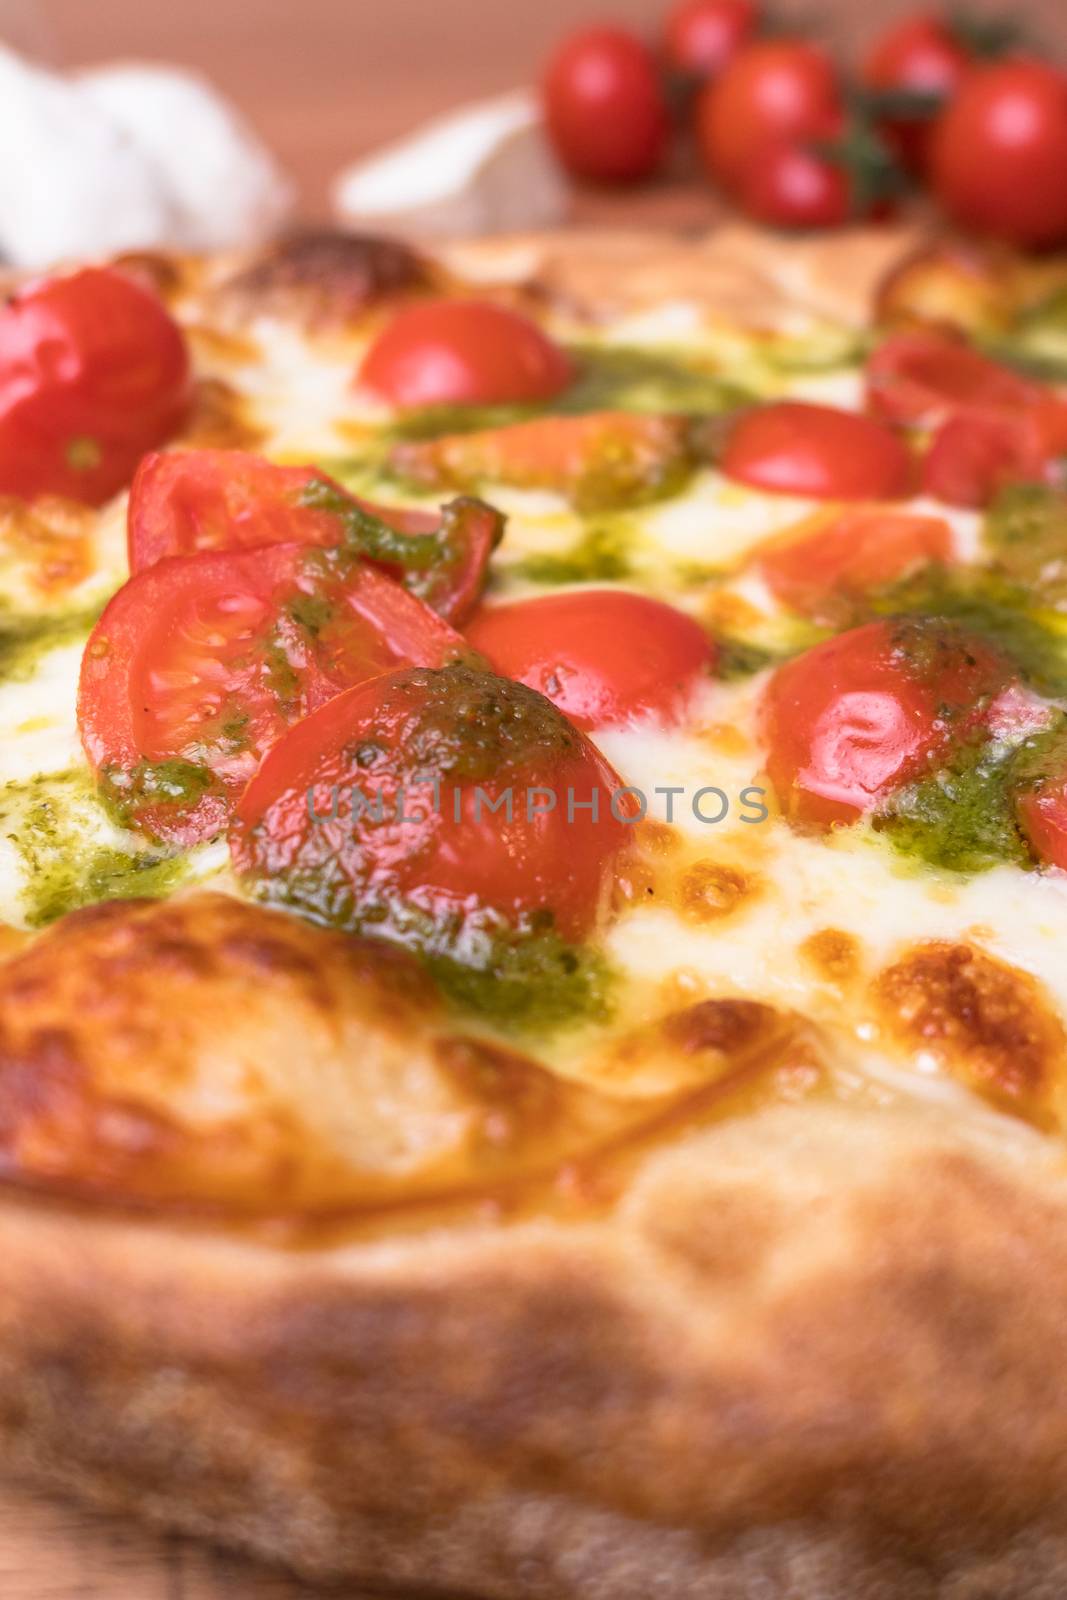 Pinsa romana, original recipe. Ancestor of the well-known pizza. Its main characteristic is due to a mix of flour, presence of mother yeast, absence of animal fat and use of a limited amount of oil. Finally the long rising (minimum 24 hours).